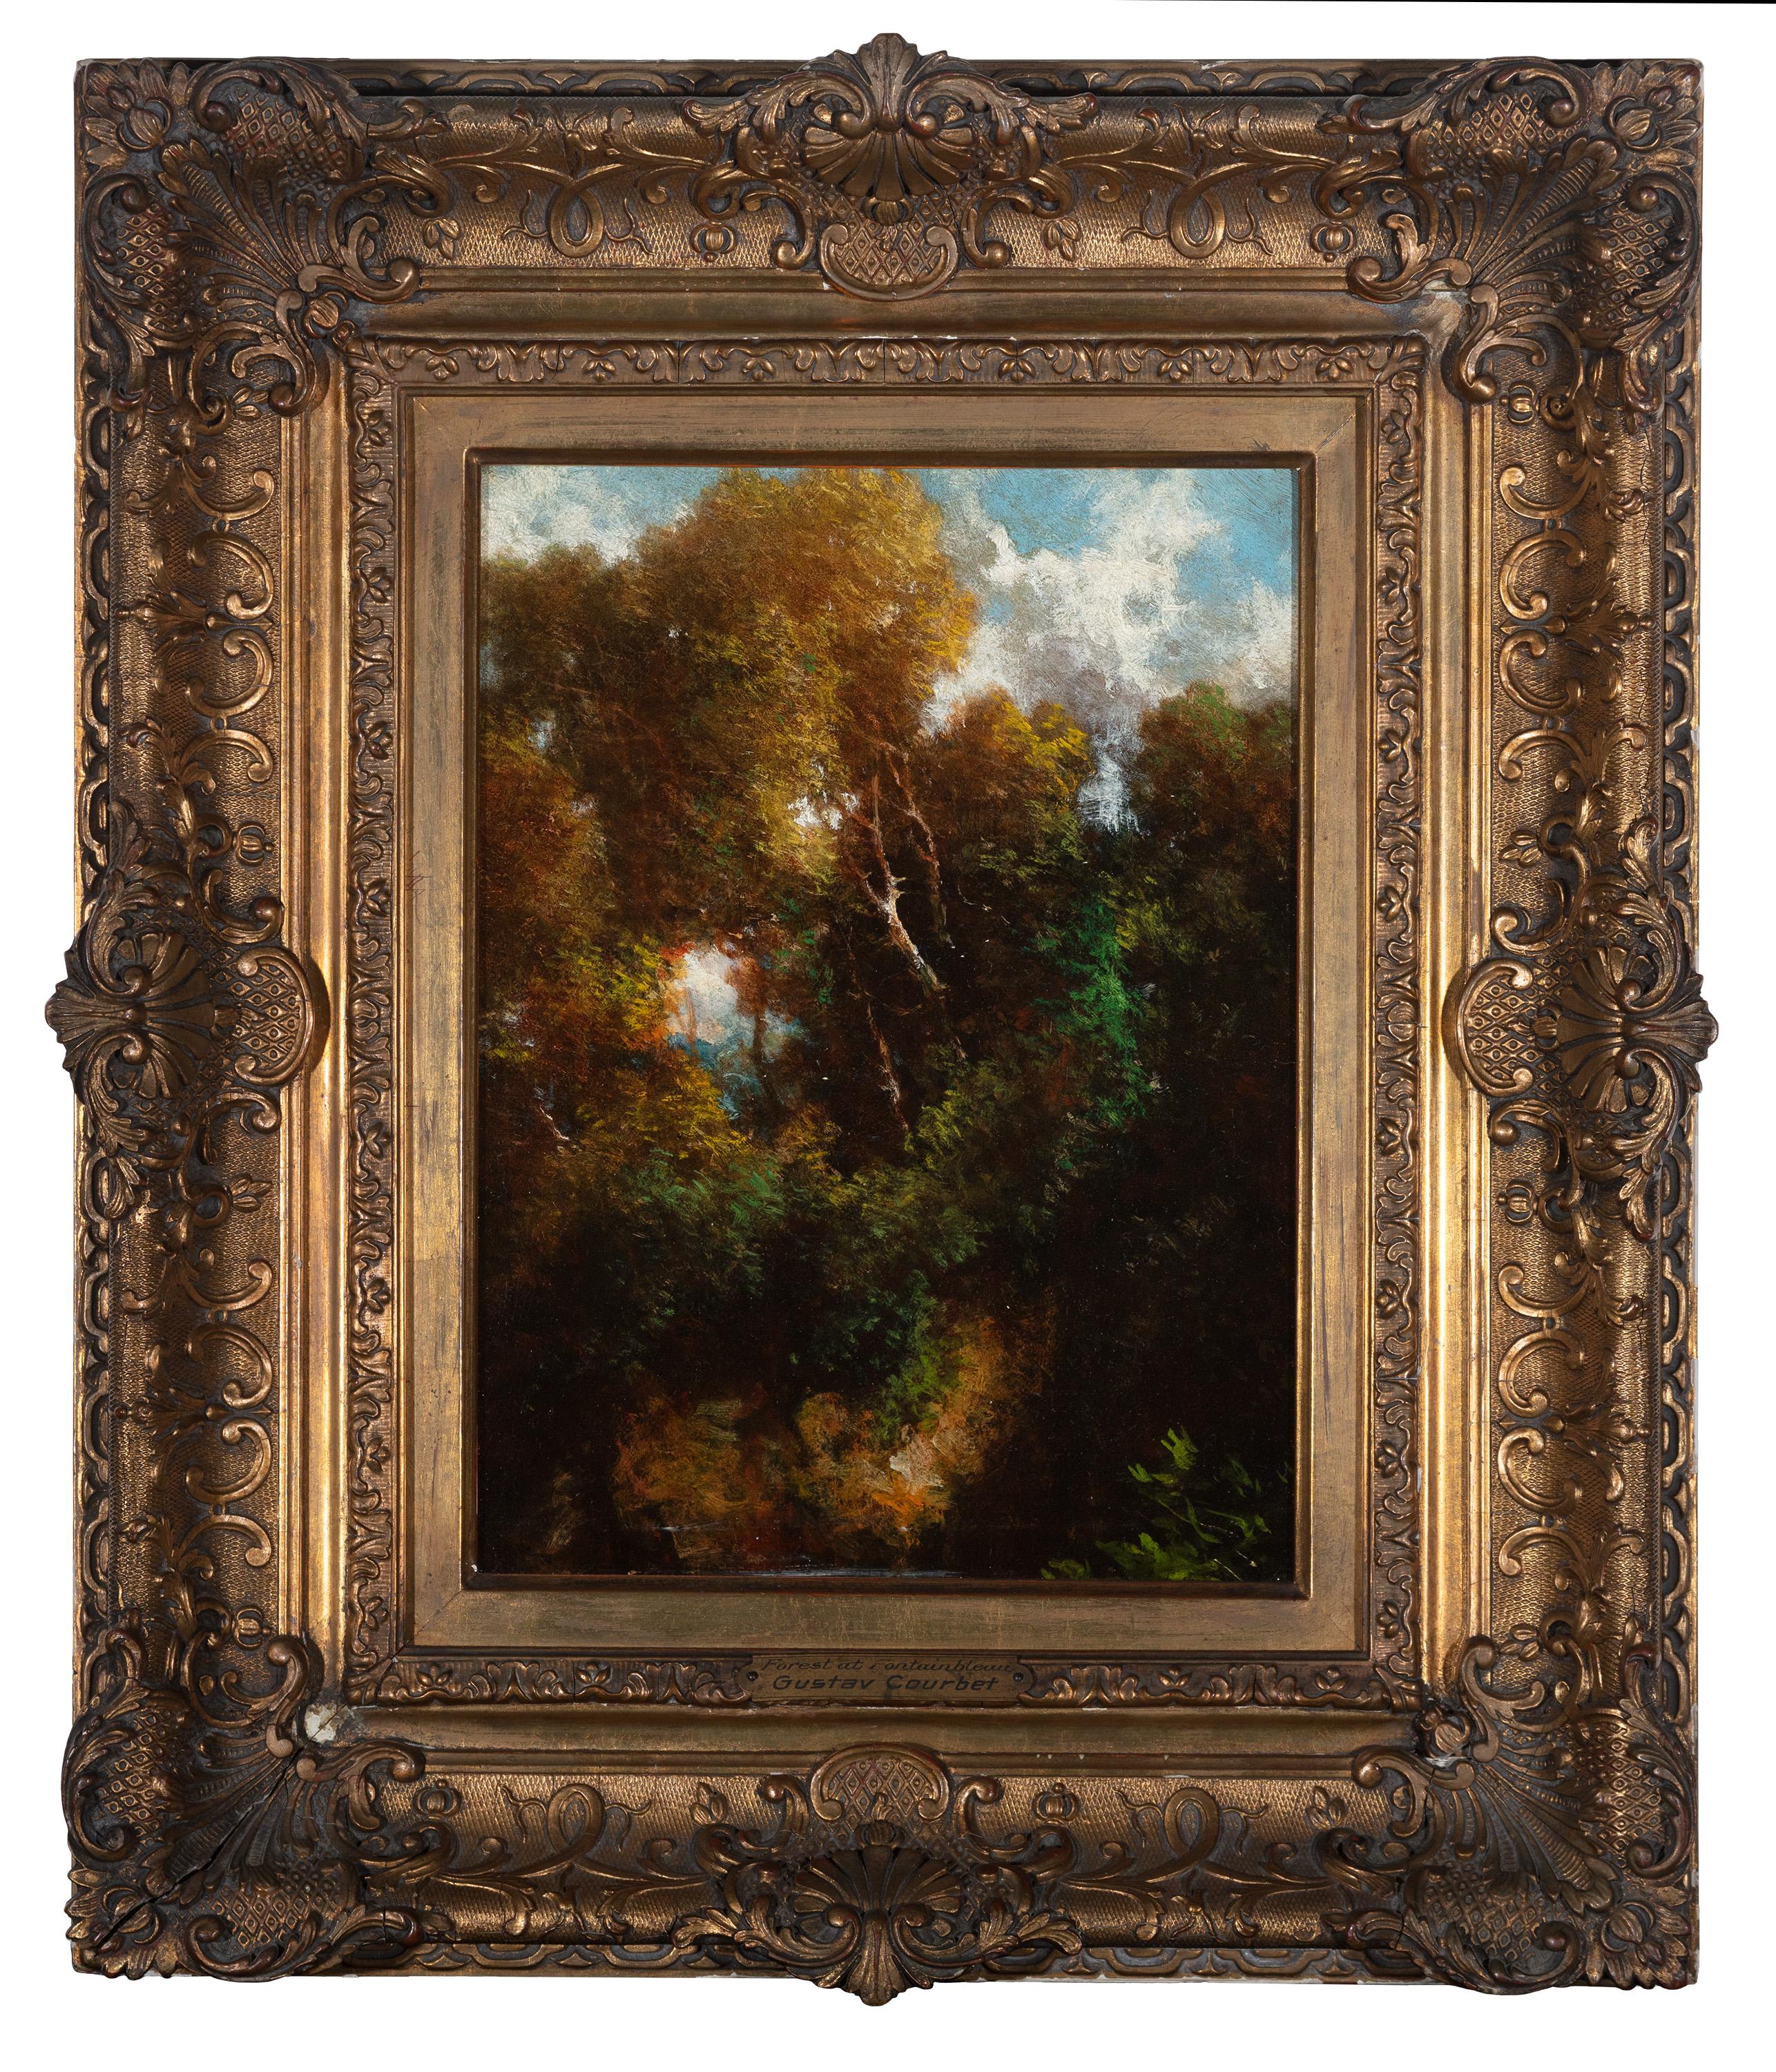 Théodore Rousseau (circle of) Landscape Painting - 'Forest at Fountainbleau' Original Oil Painting on Board from Barbizon School